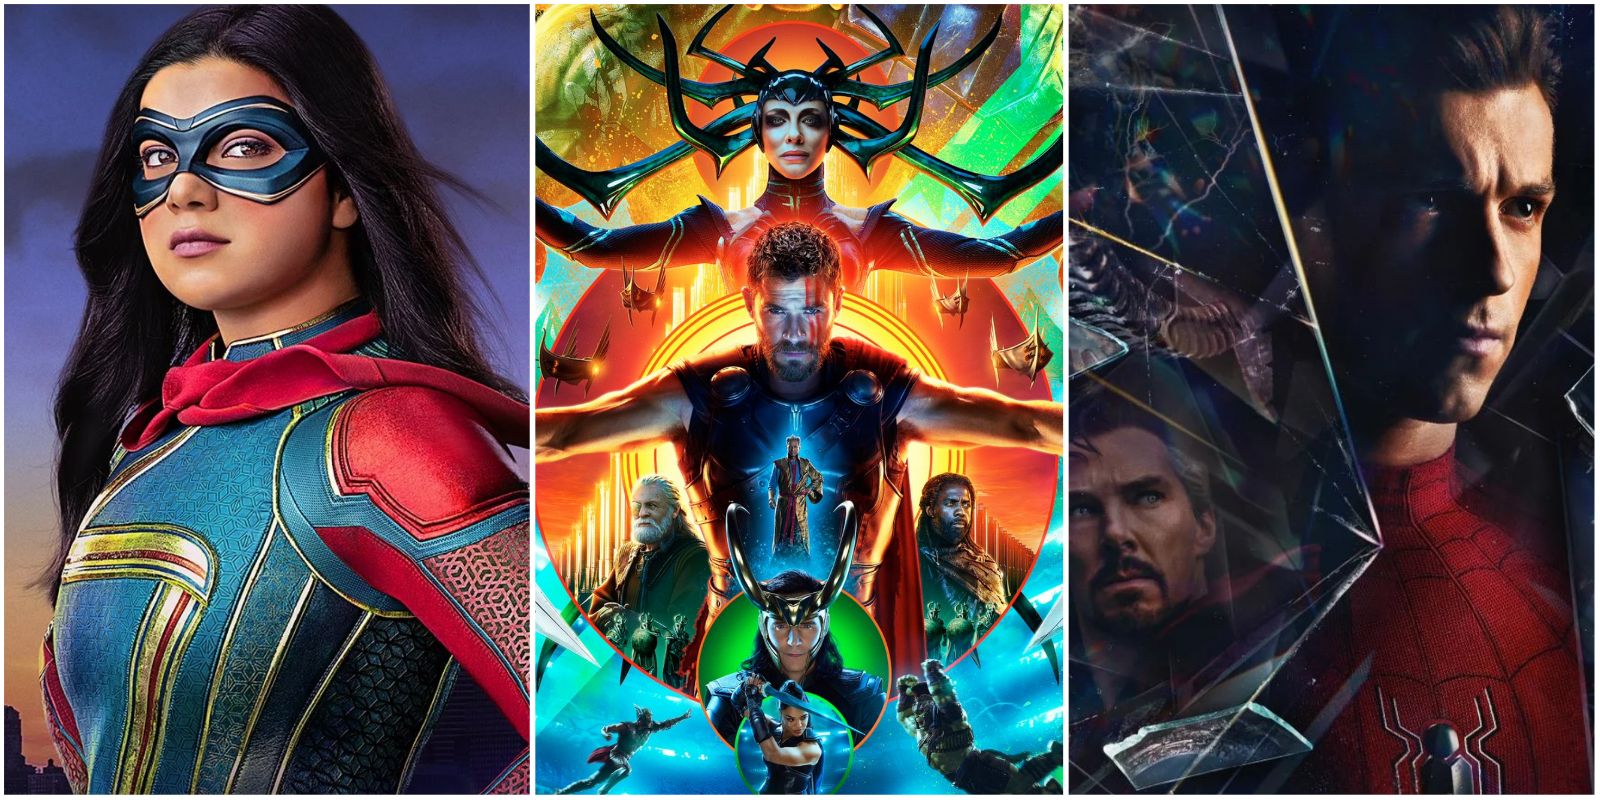 Three images showing Ms. Marvel, the poster for Thor Ragnarok, and the poster for Spider-Man: No Way Home